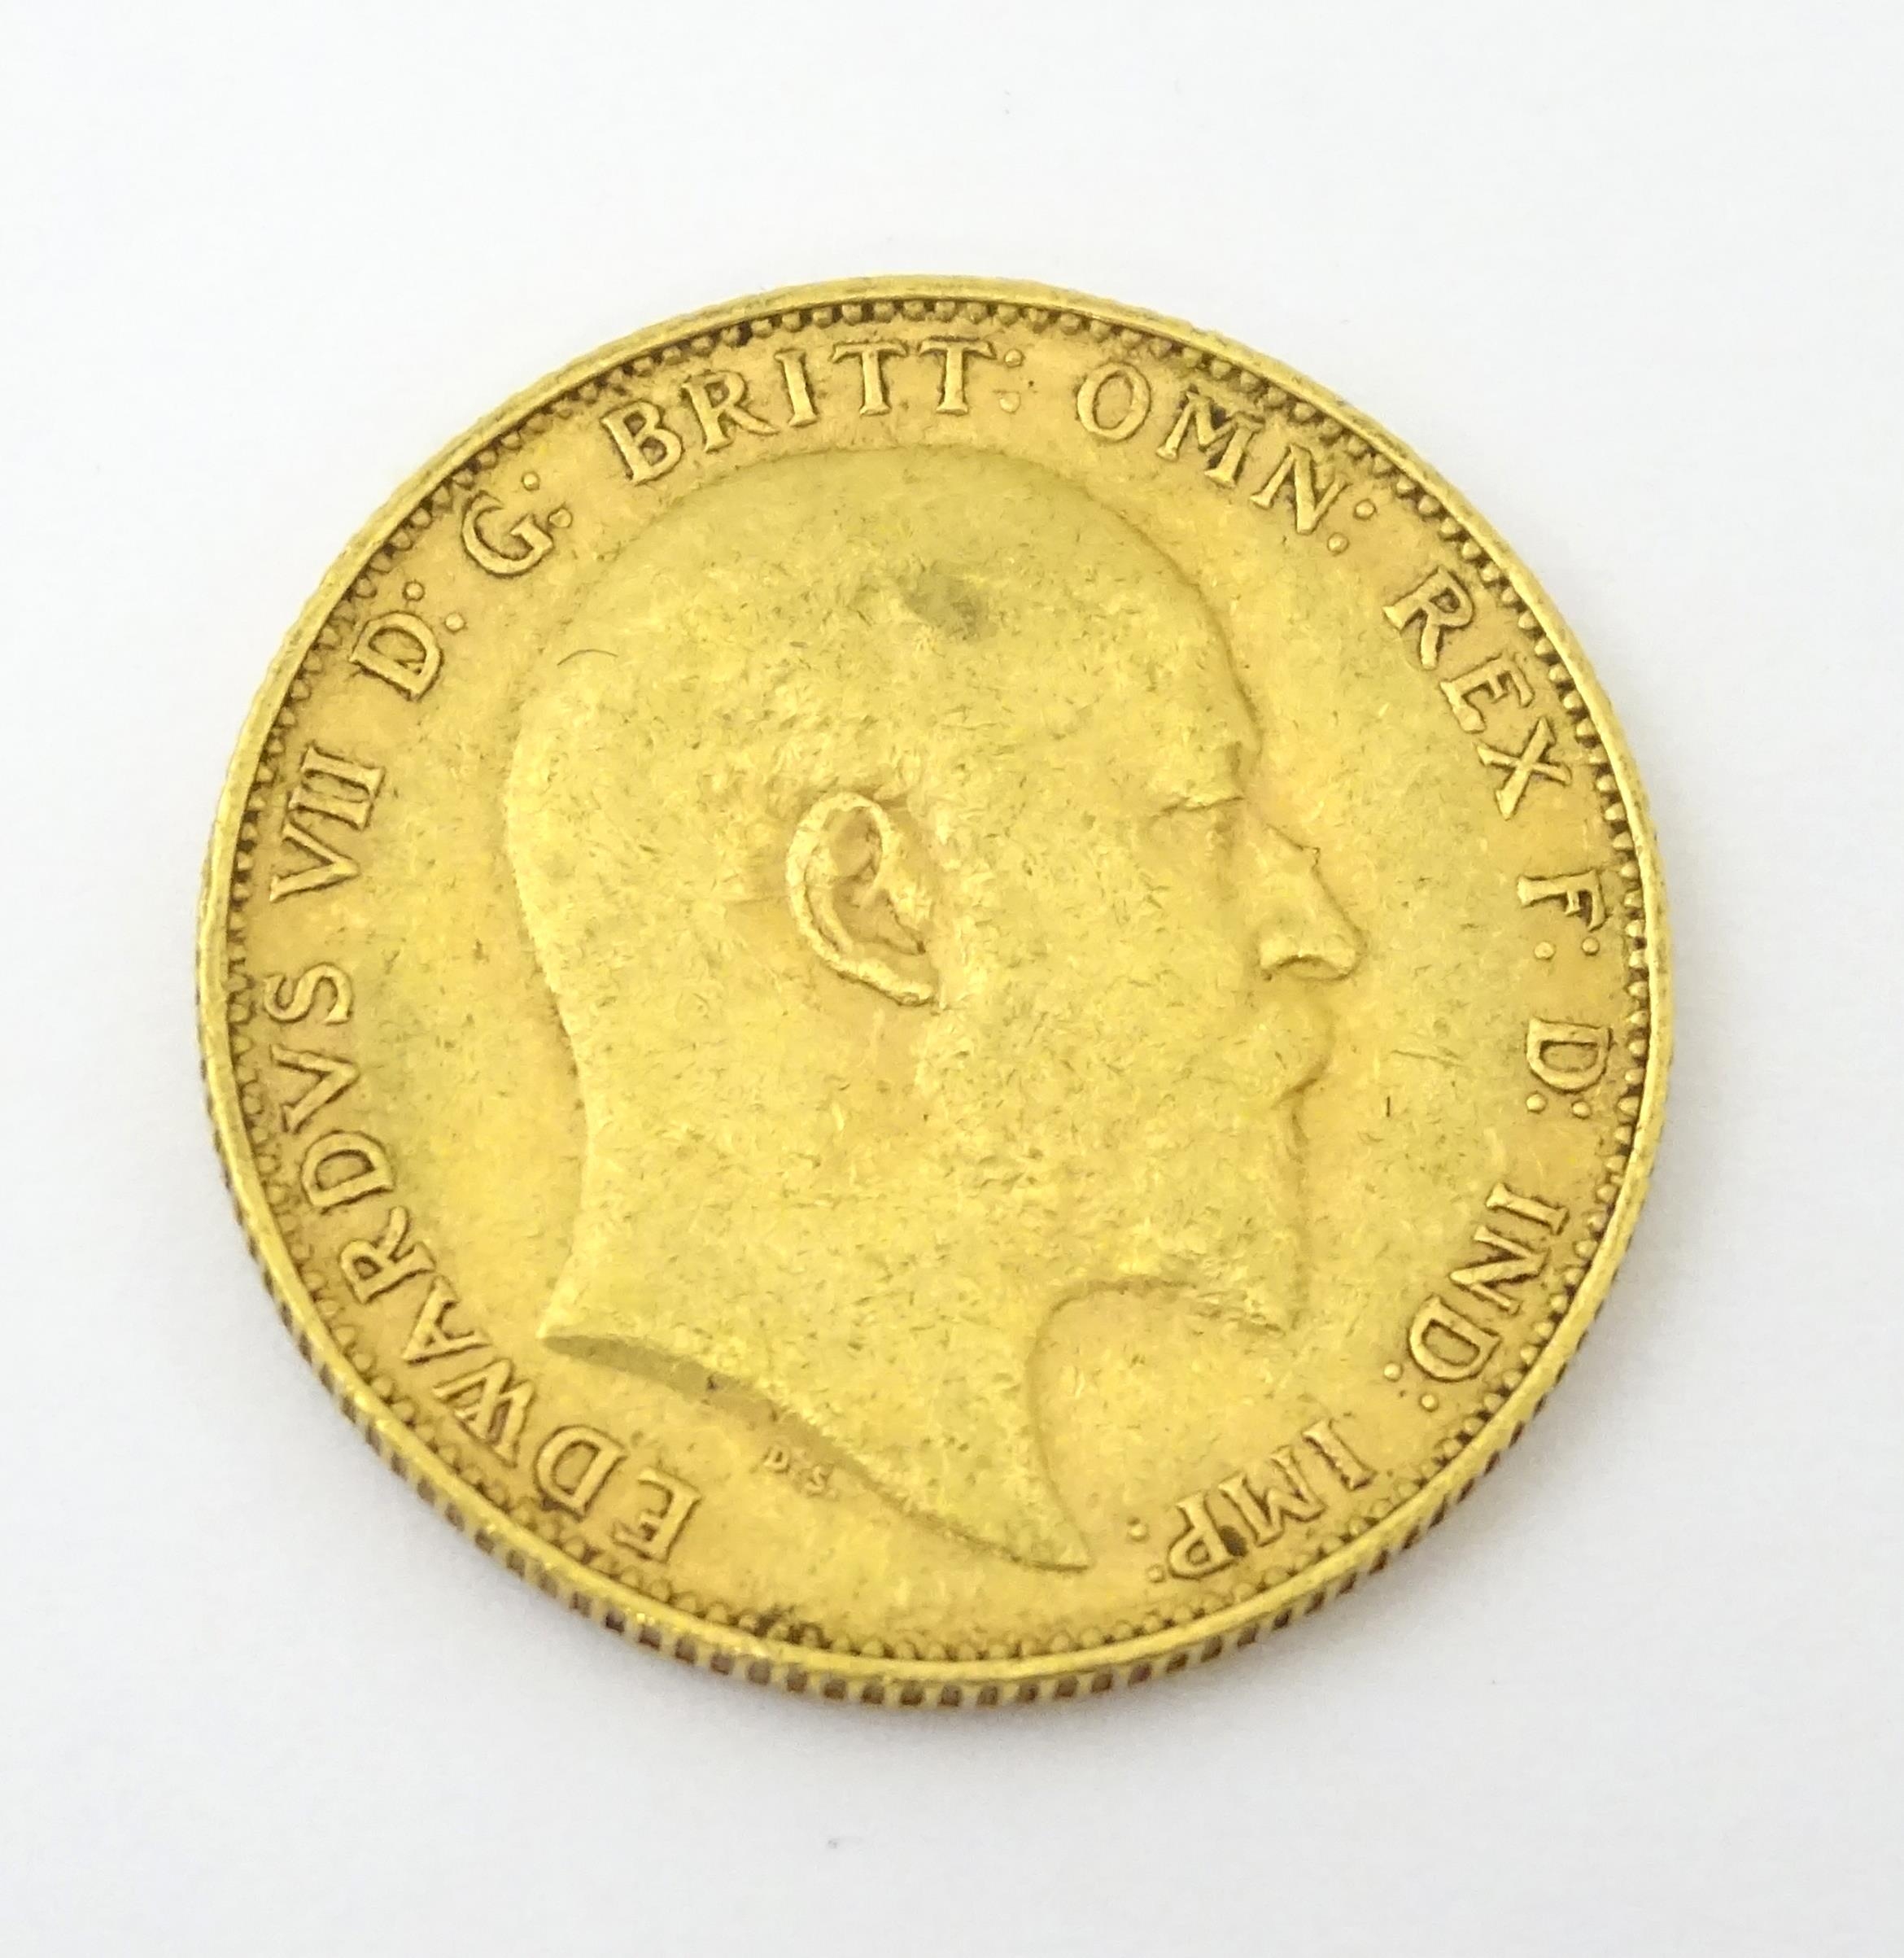 Coin: An Edward III 1907 gold sovereign, Perth Mint. (8g) Please Note - we do not make reference